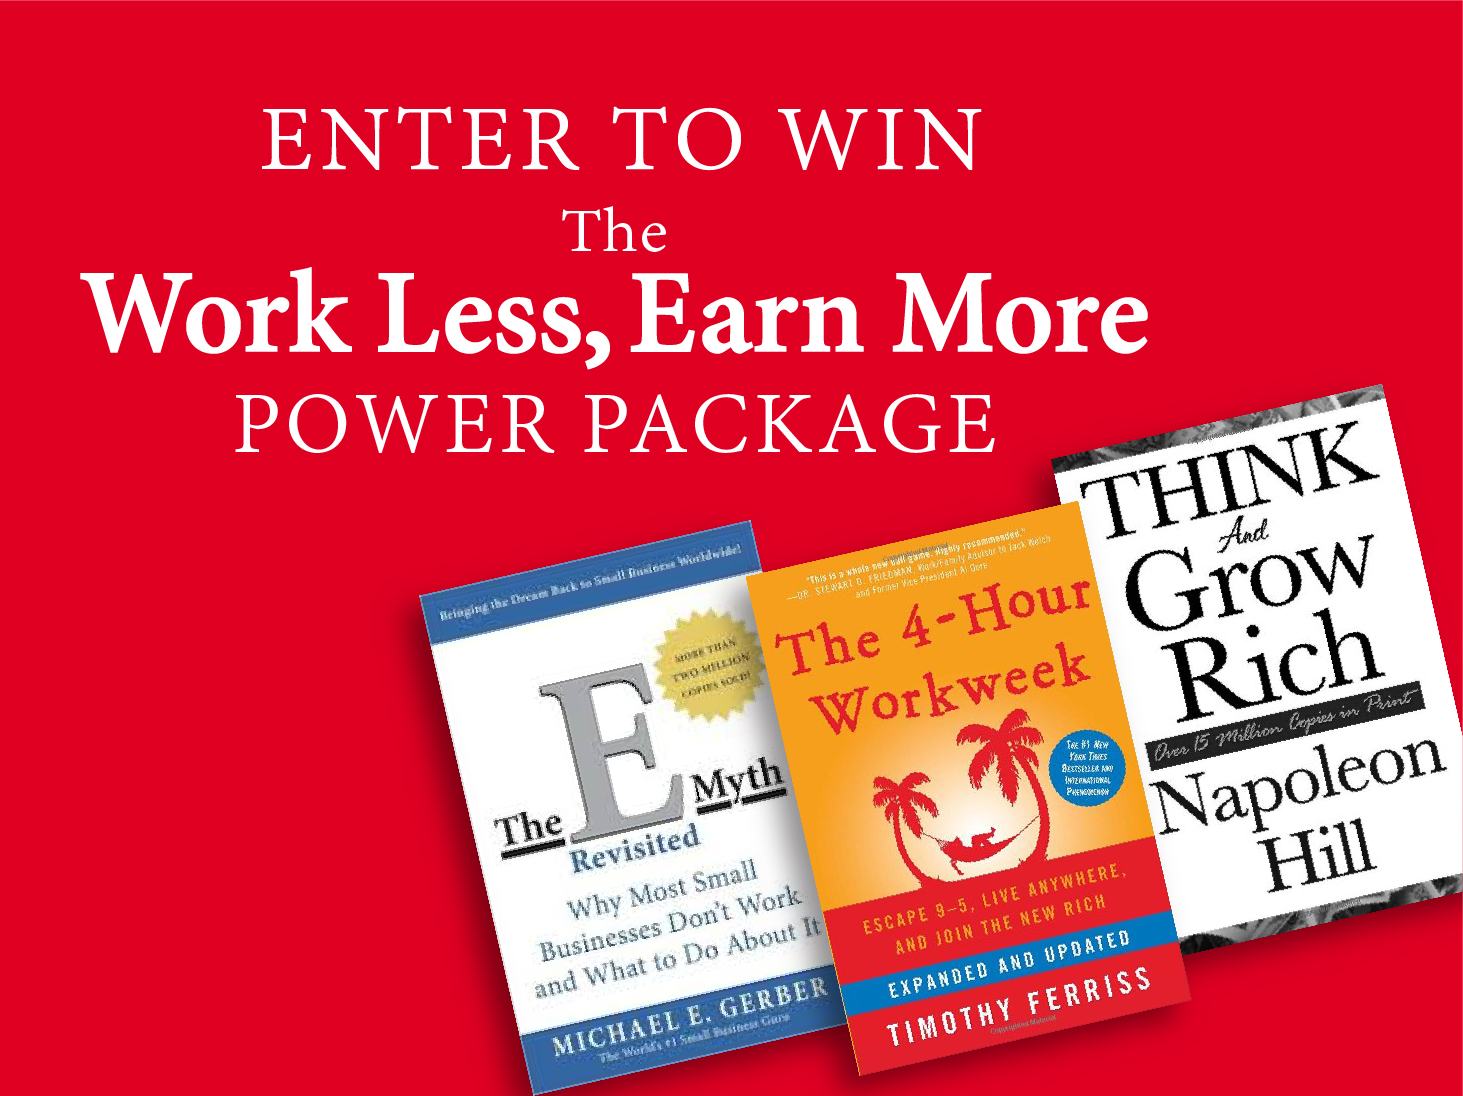 E Myth, 4-Hour Workweek, Think and Grow Rich book giveaway